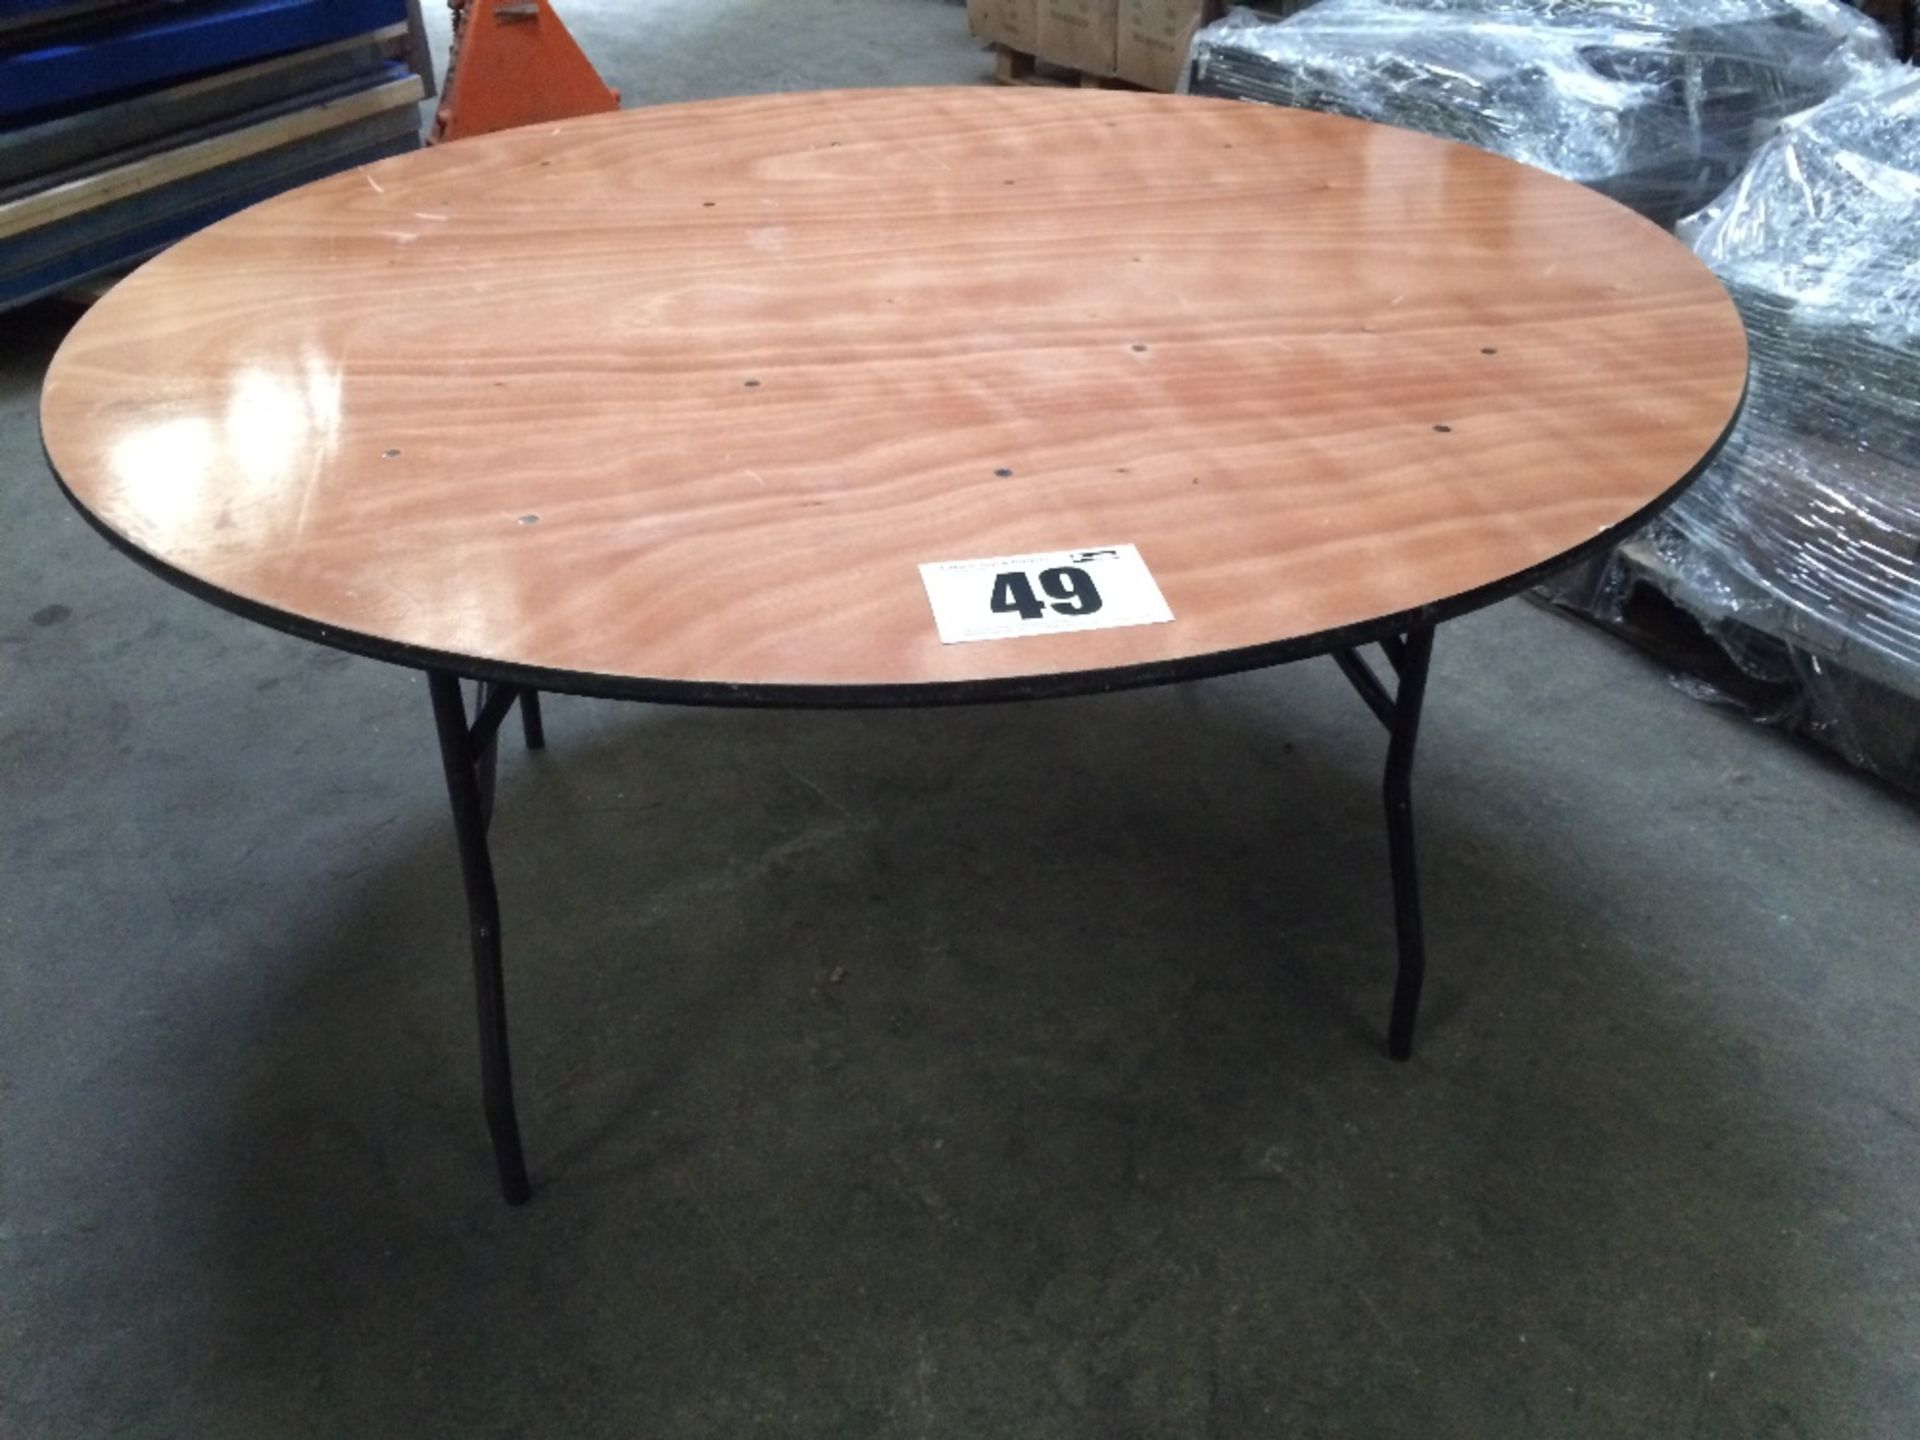 2 - 5' circular wooden collapsible tables